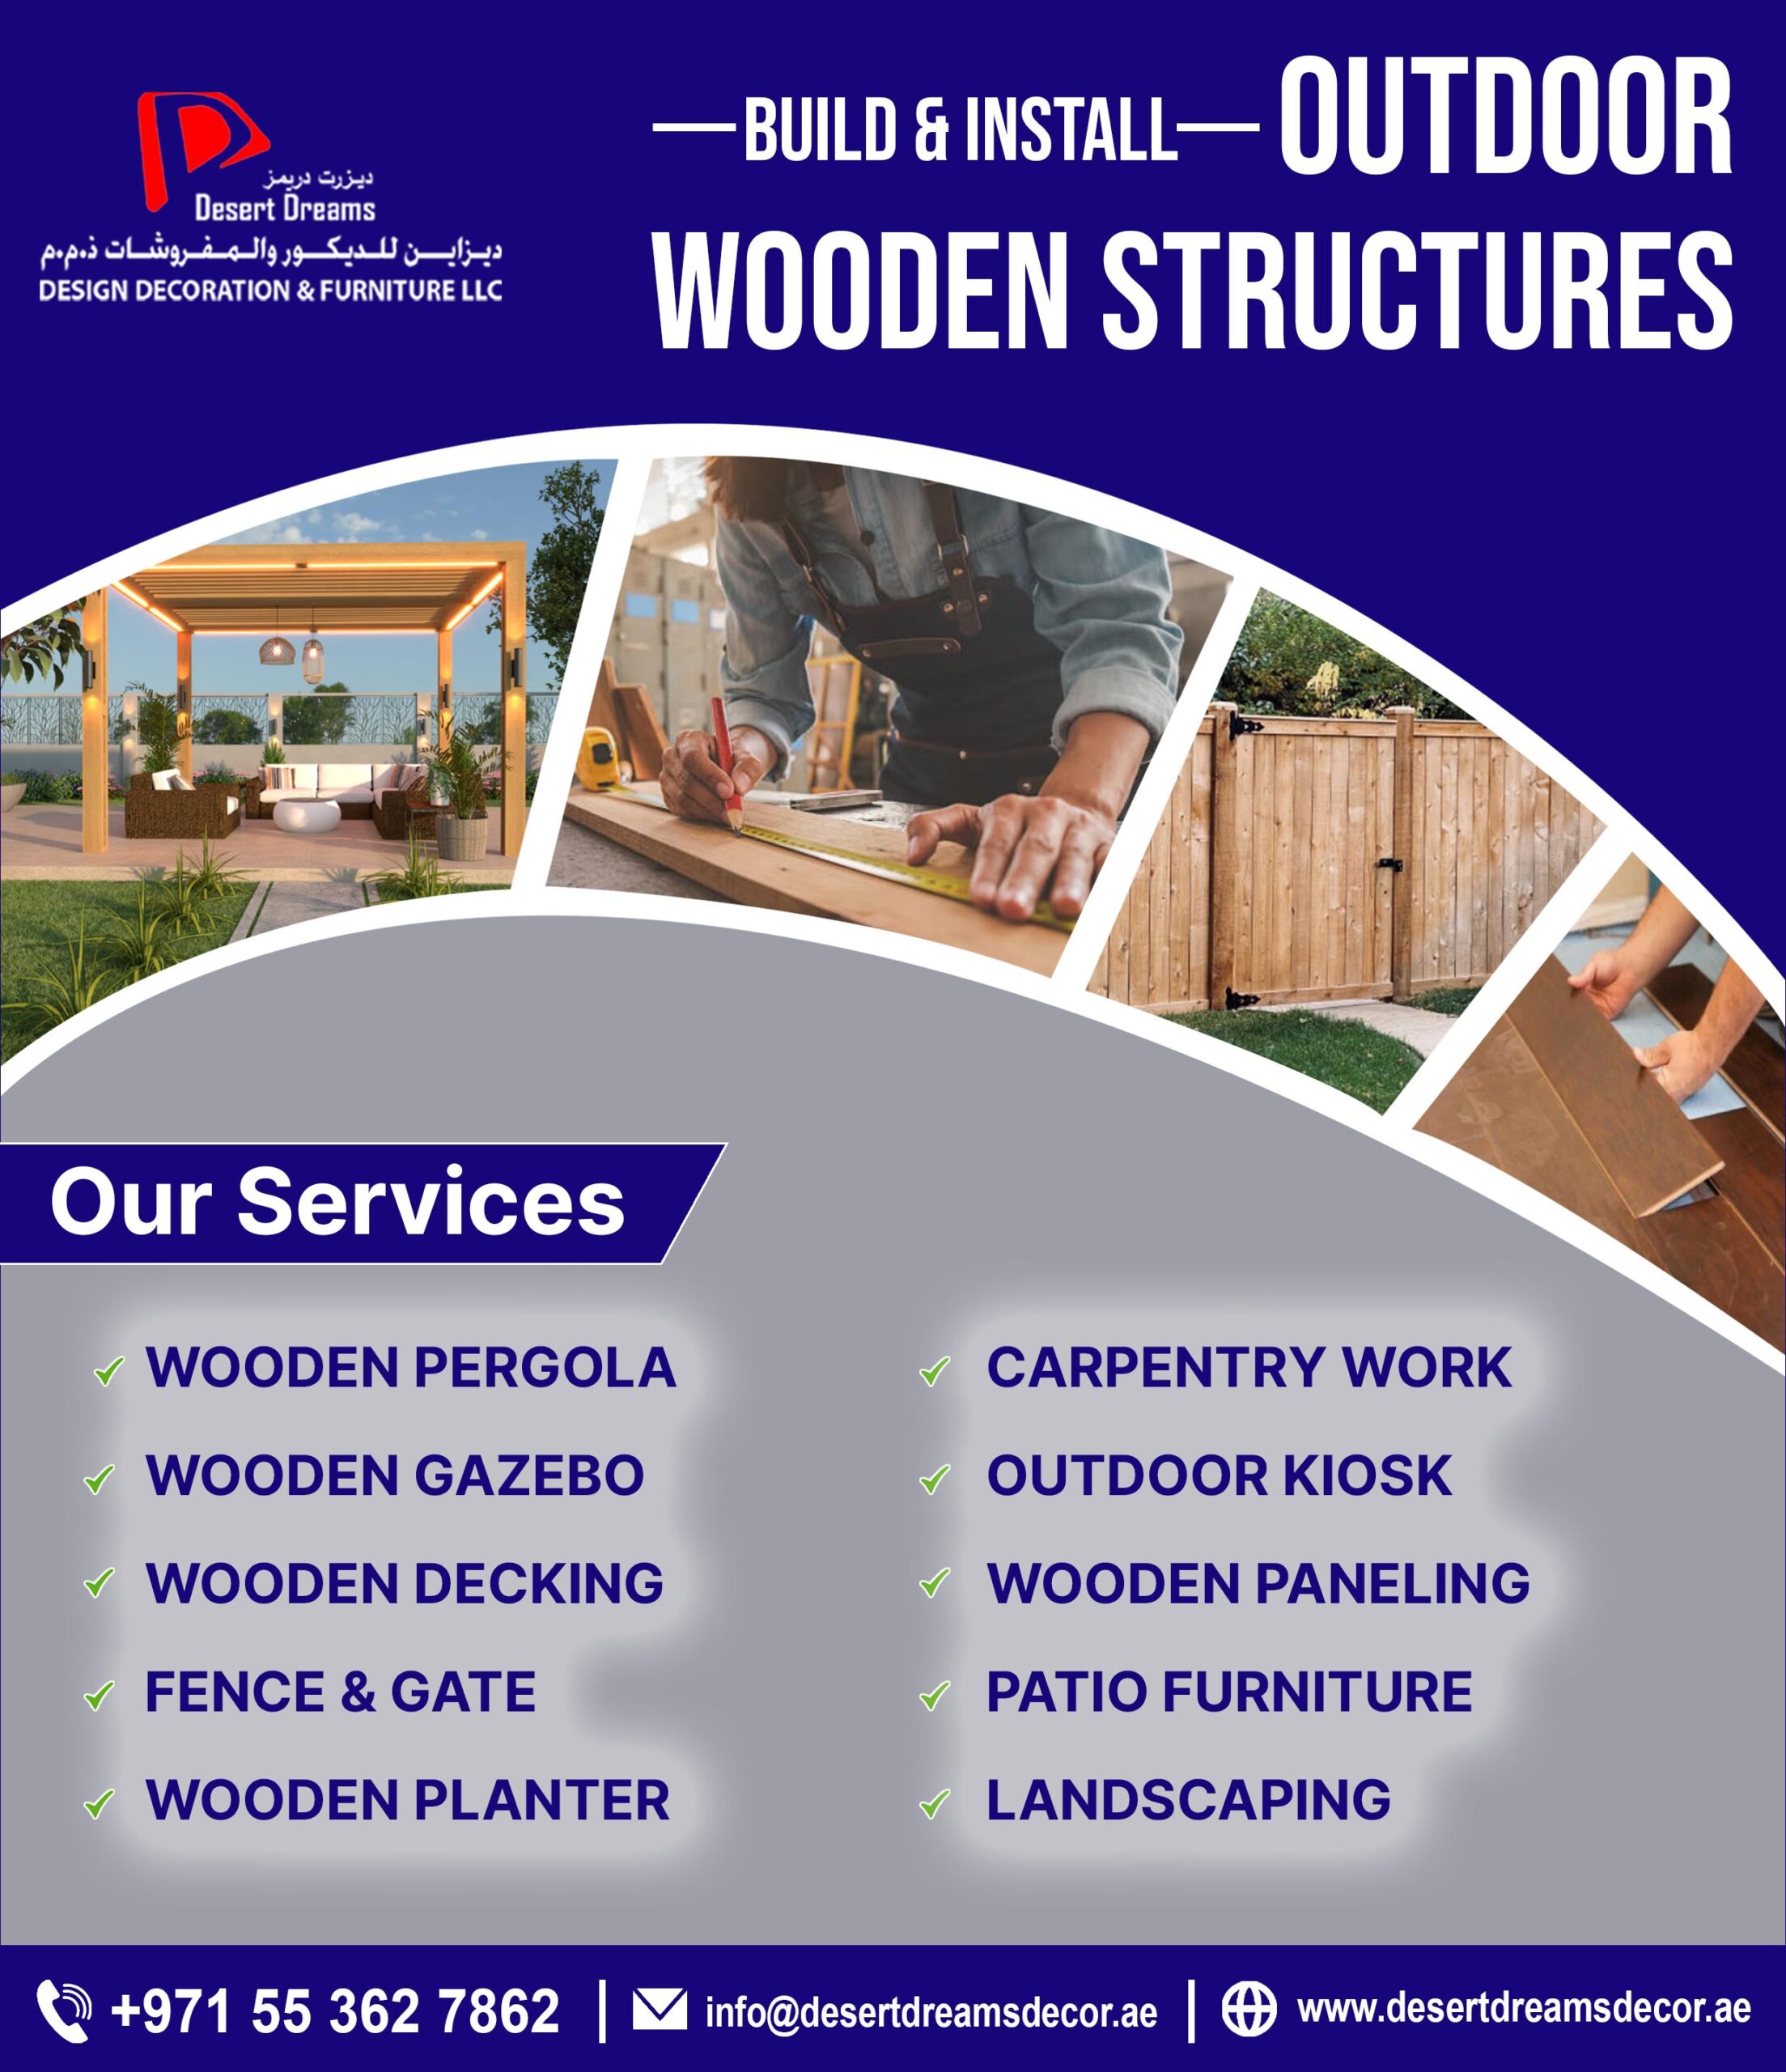 Build and Install Outdoor Wooden Structures in UAE.jpg